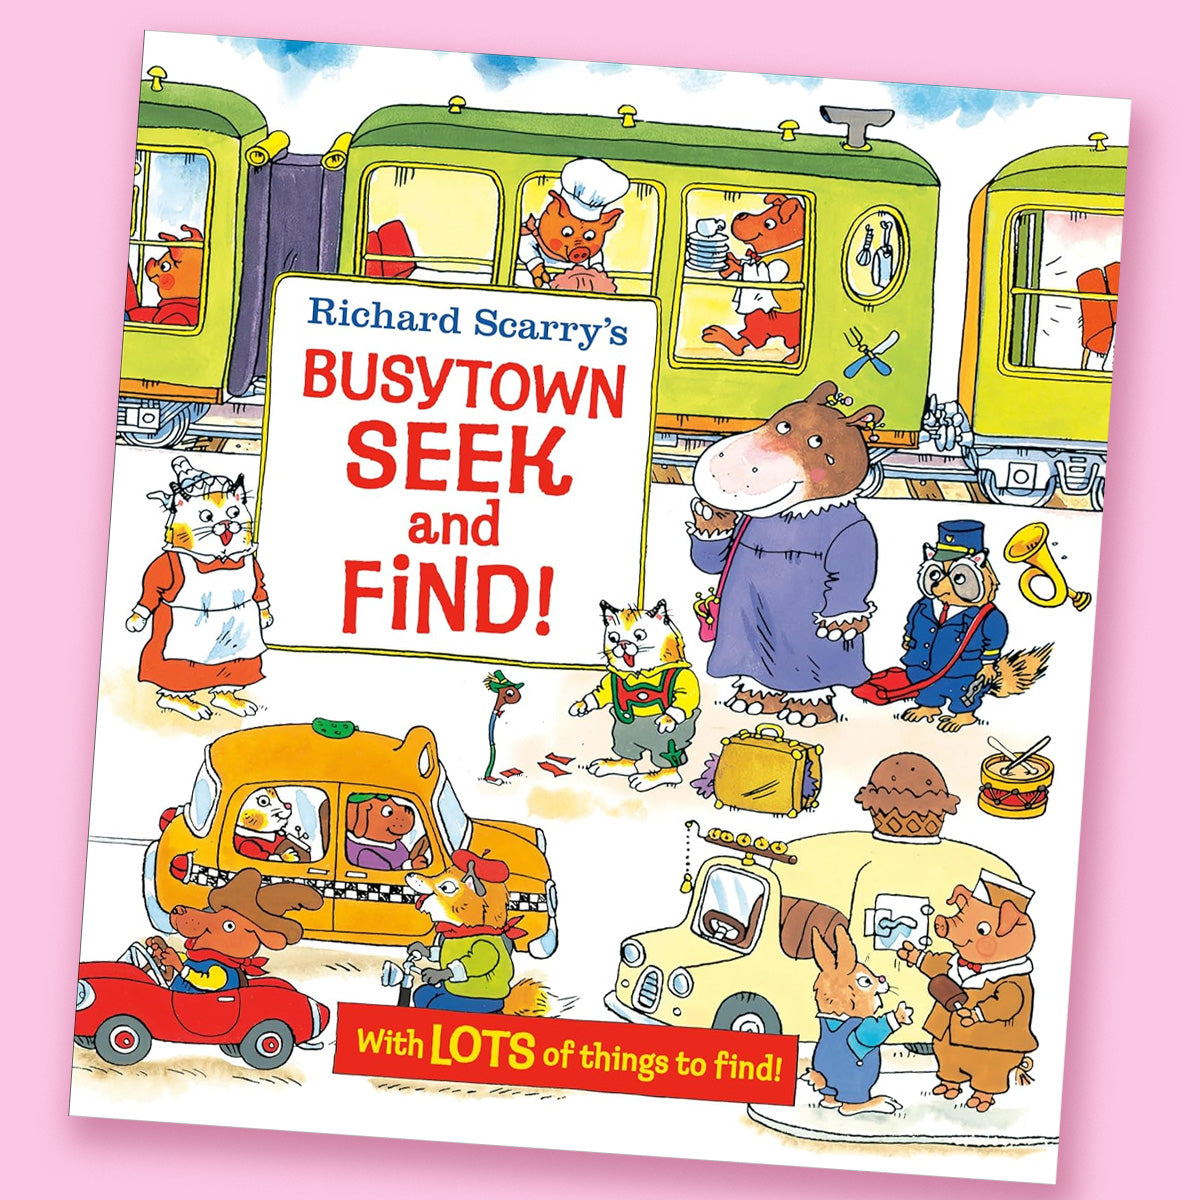 Richard Scarry's Busytown Seek and Find! by Richard Scarry